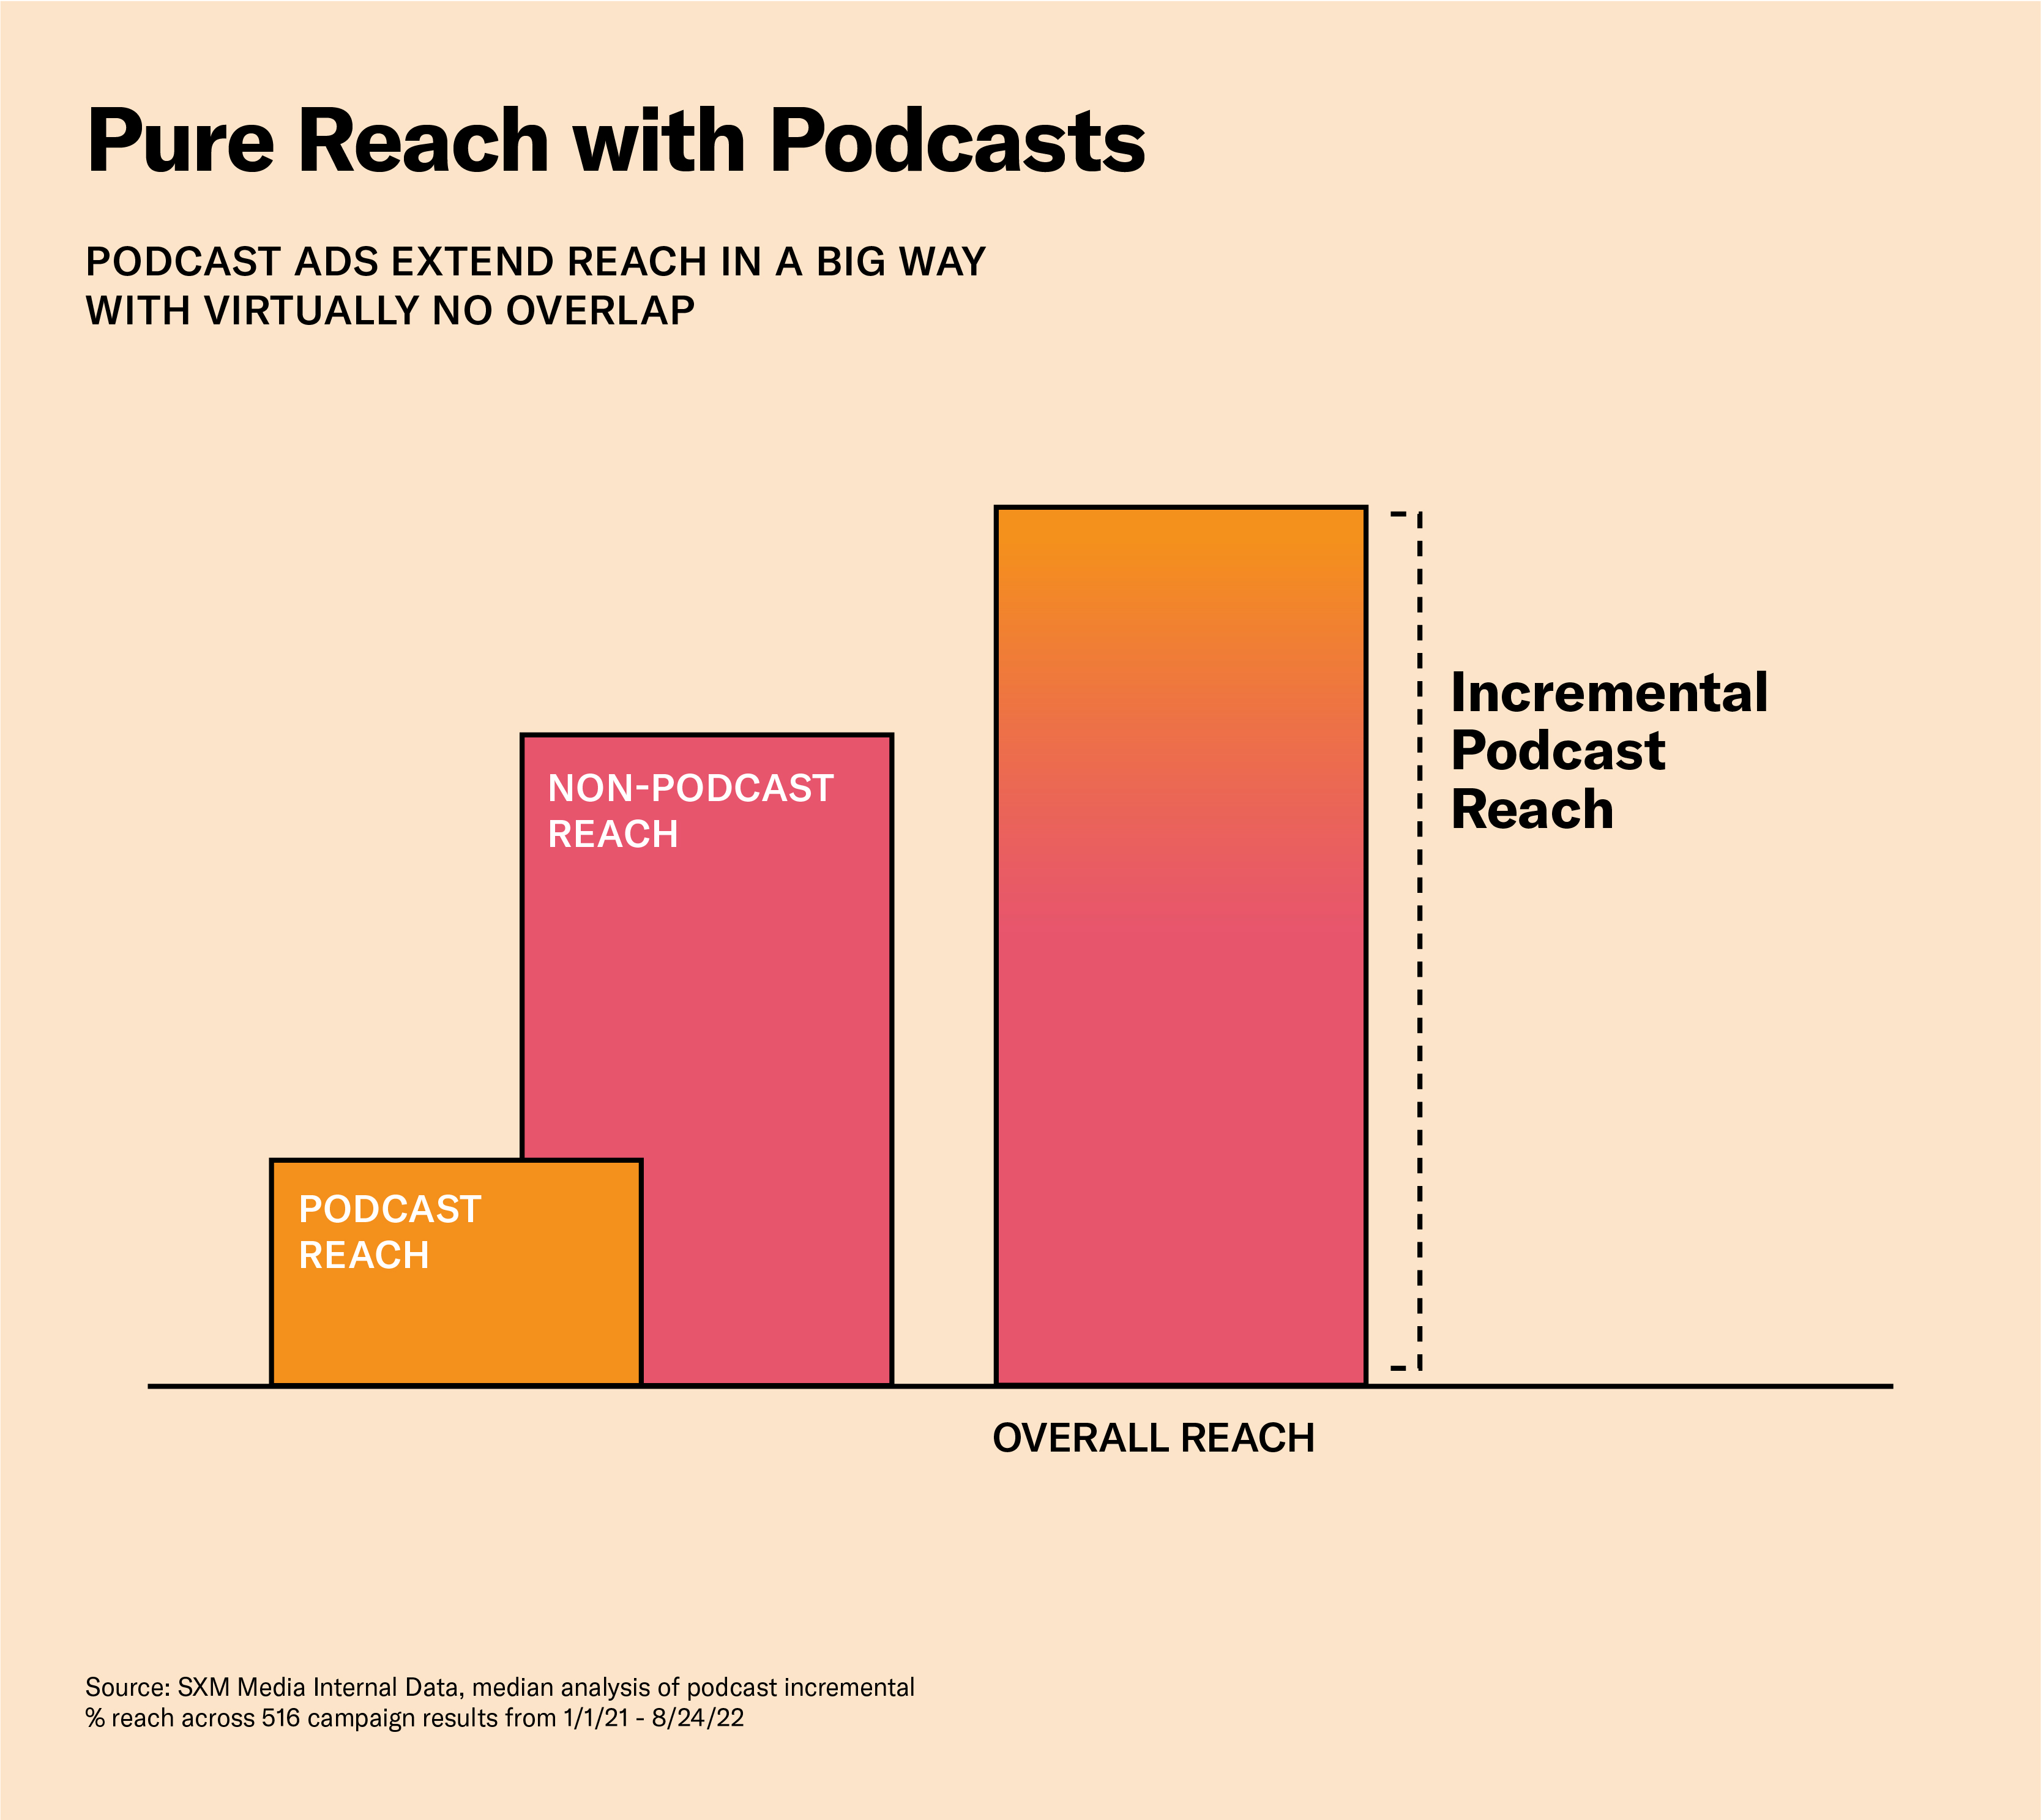 Podcasts provide incremental reach